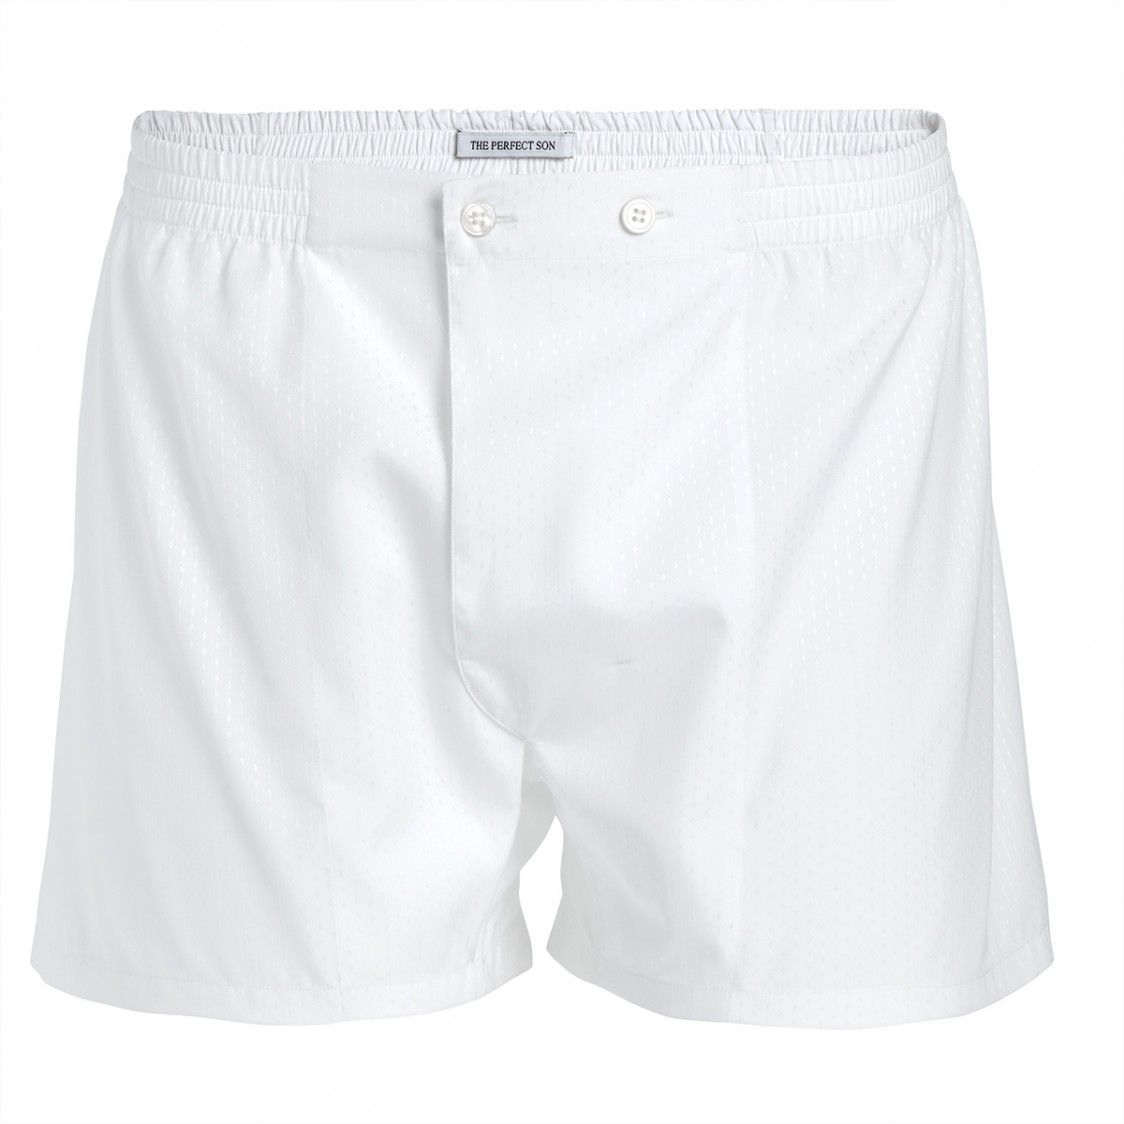 TAILORED BOXER SHORTS Nº 3 - The Perfect Son : The Perfect Son